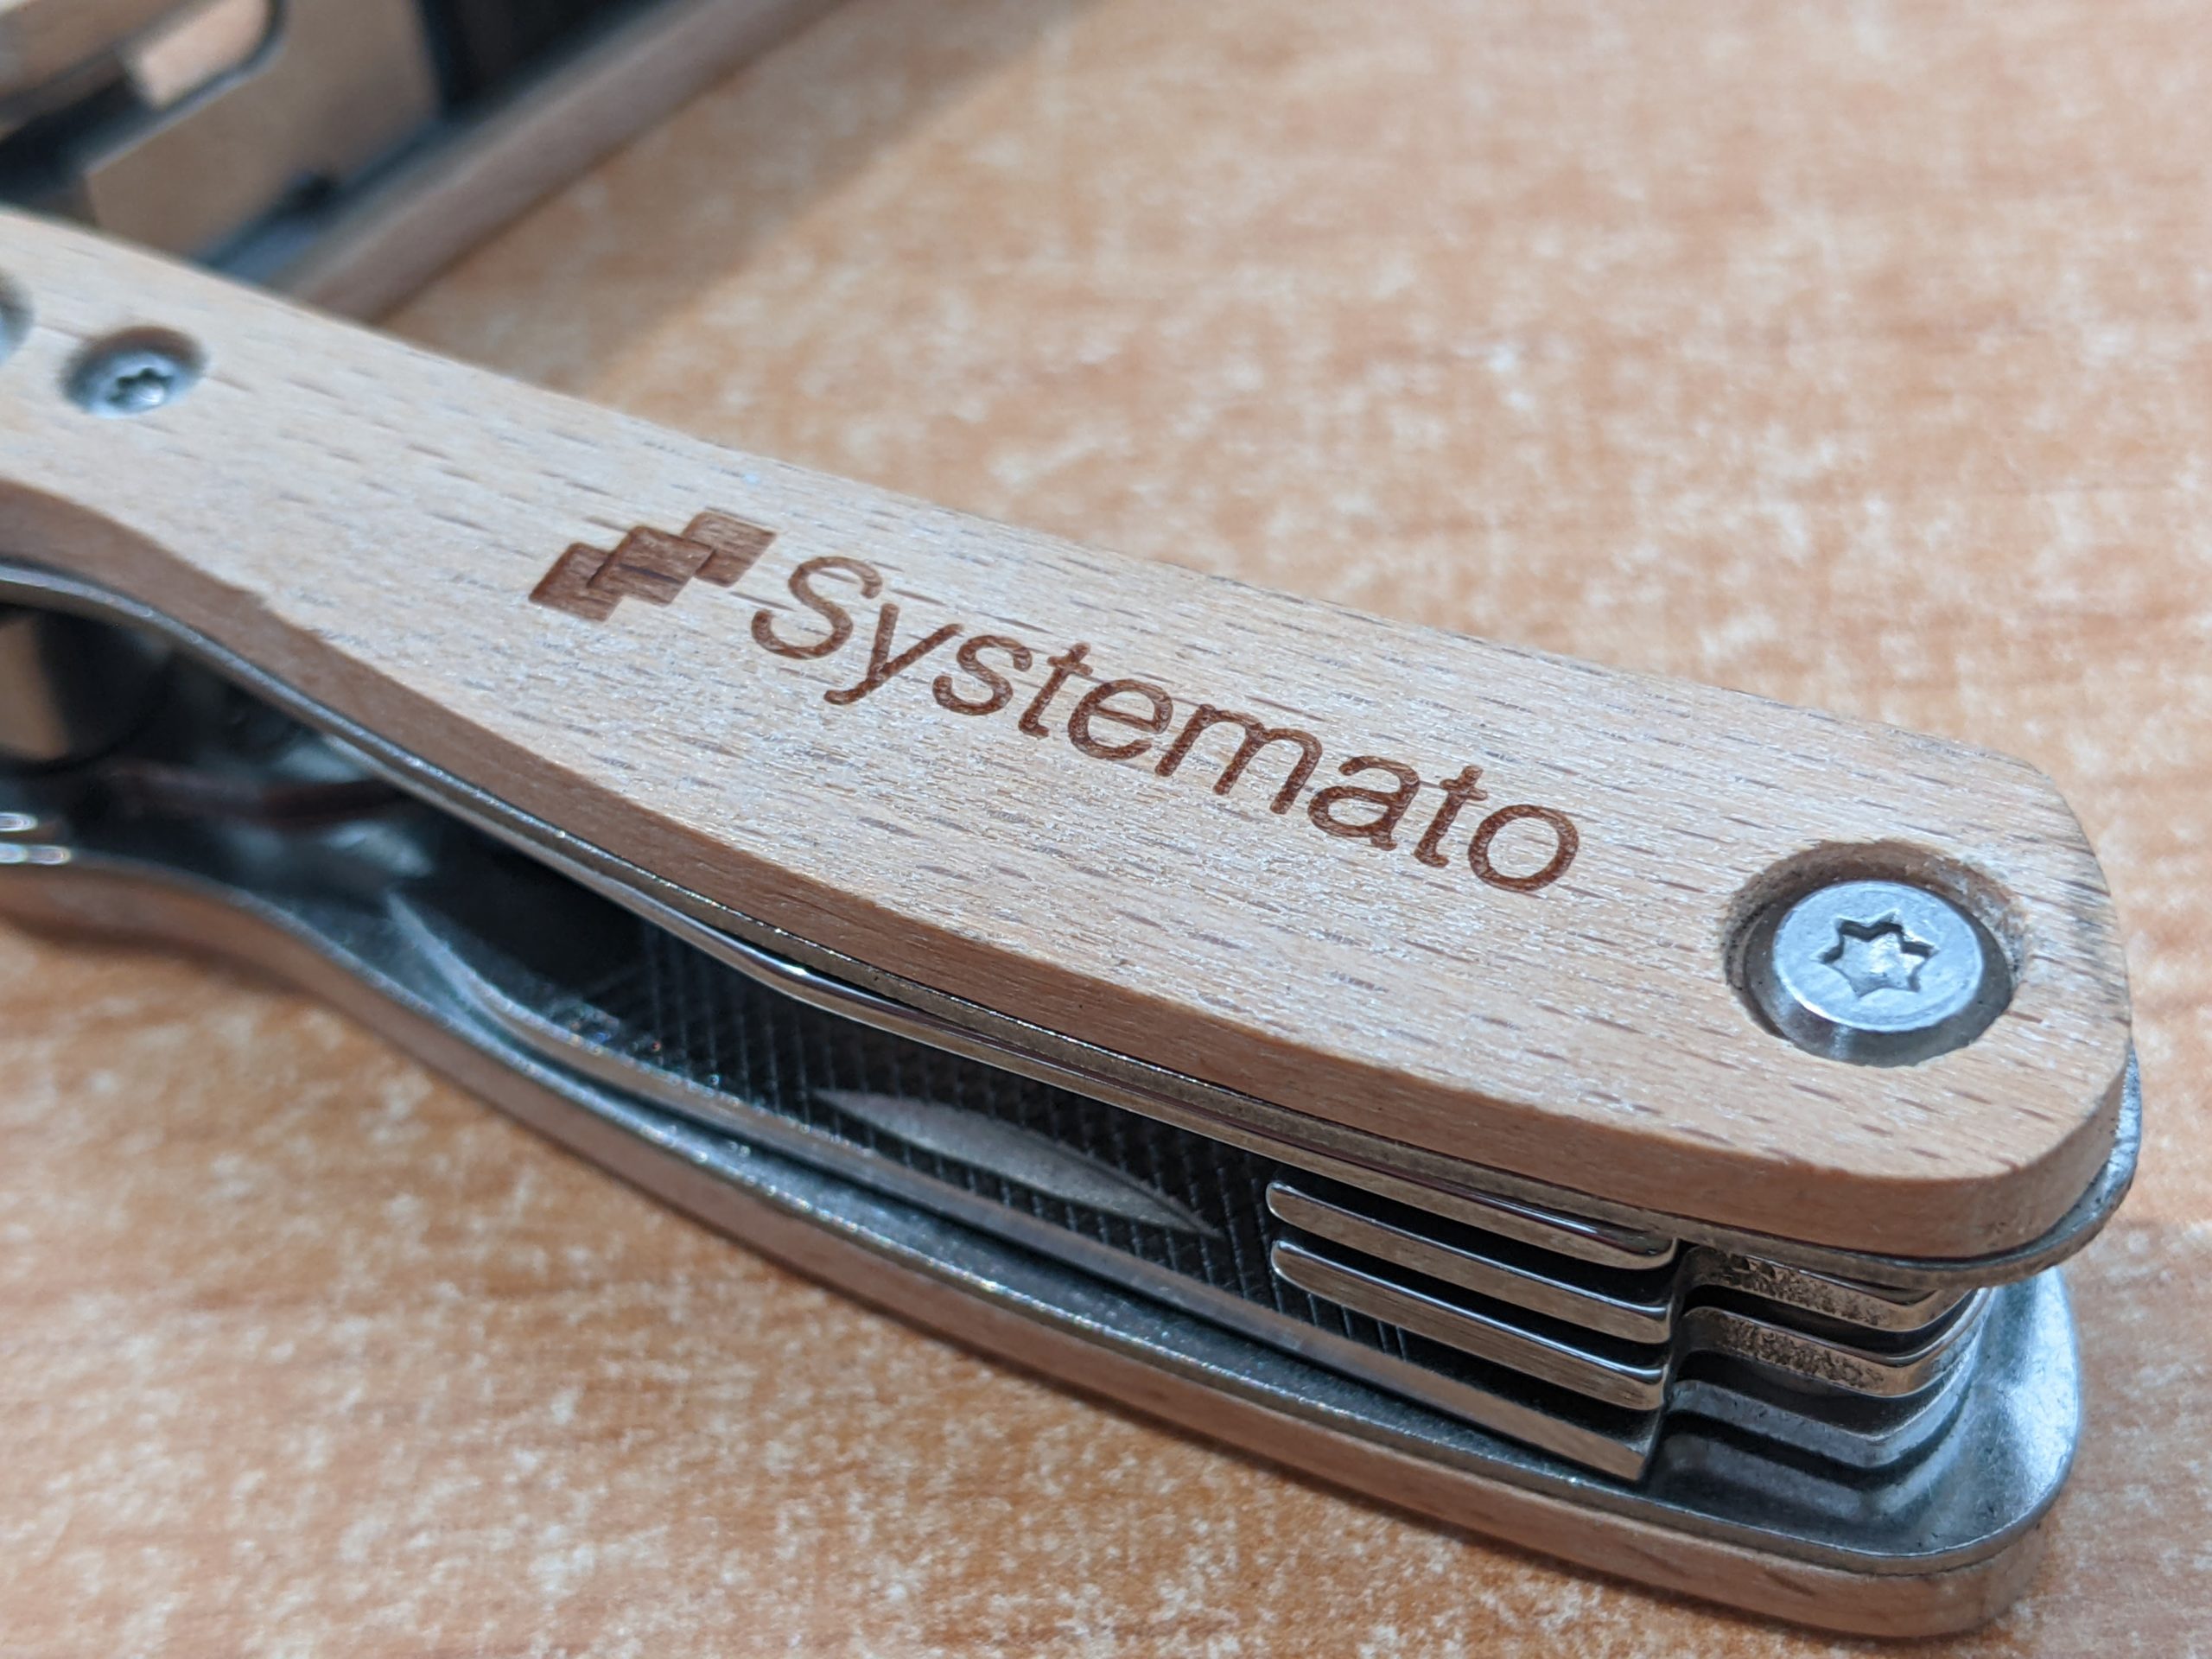 Introducing the Systematool